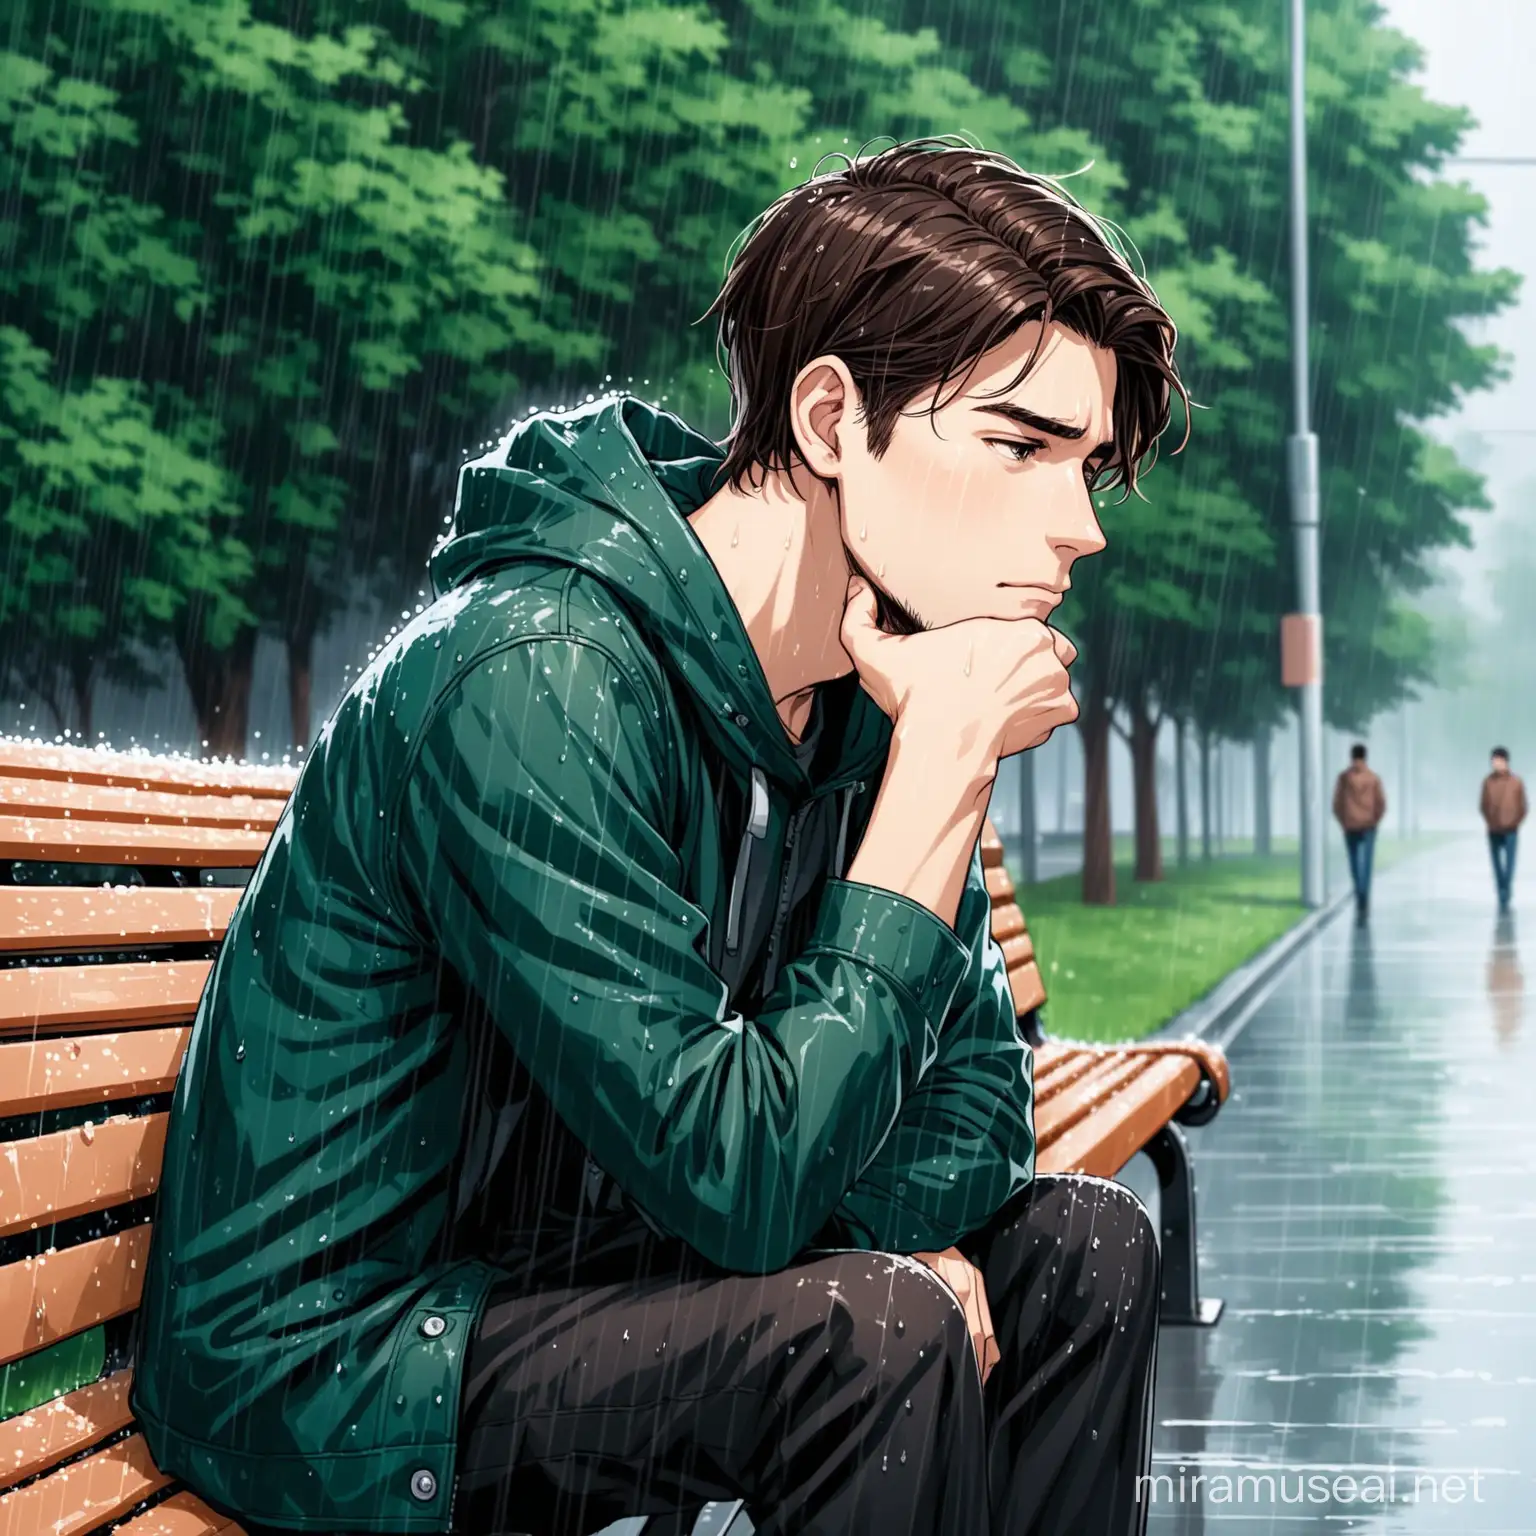 A 24-year-old, brunette-haired, beardless young man, slightly depressed, sitting on the bench in rainy weather 
